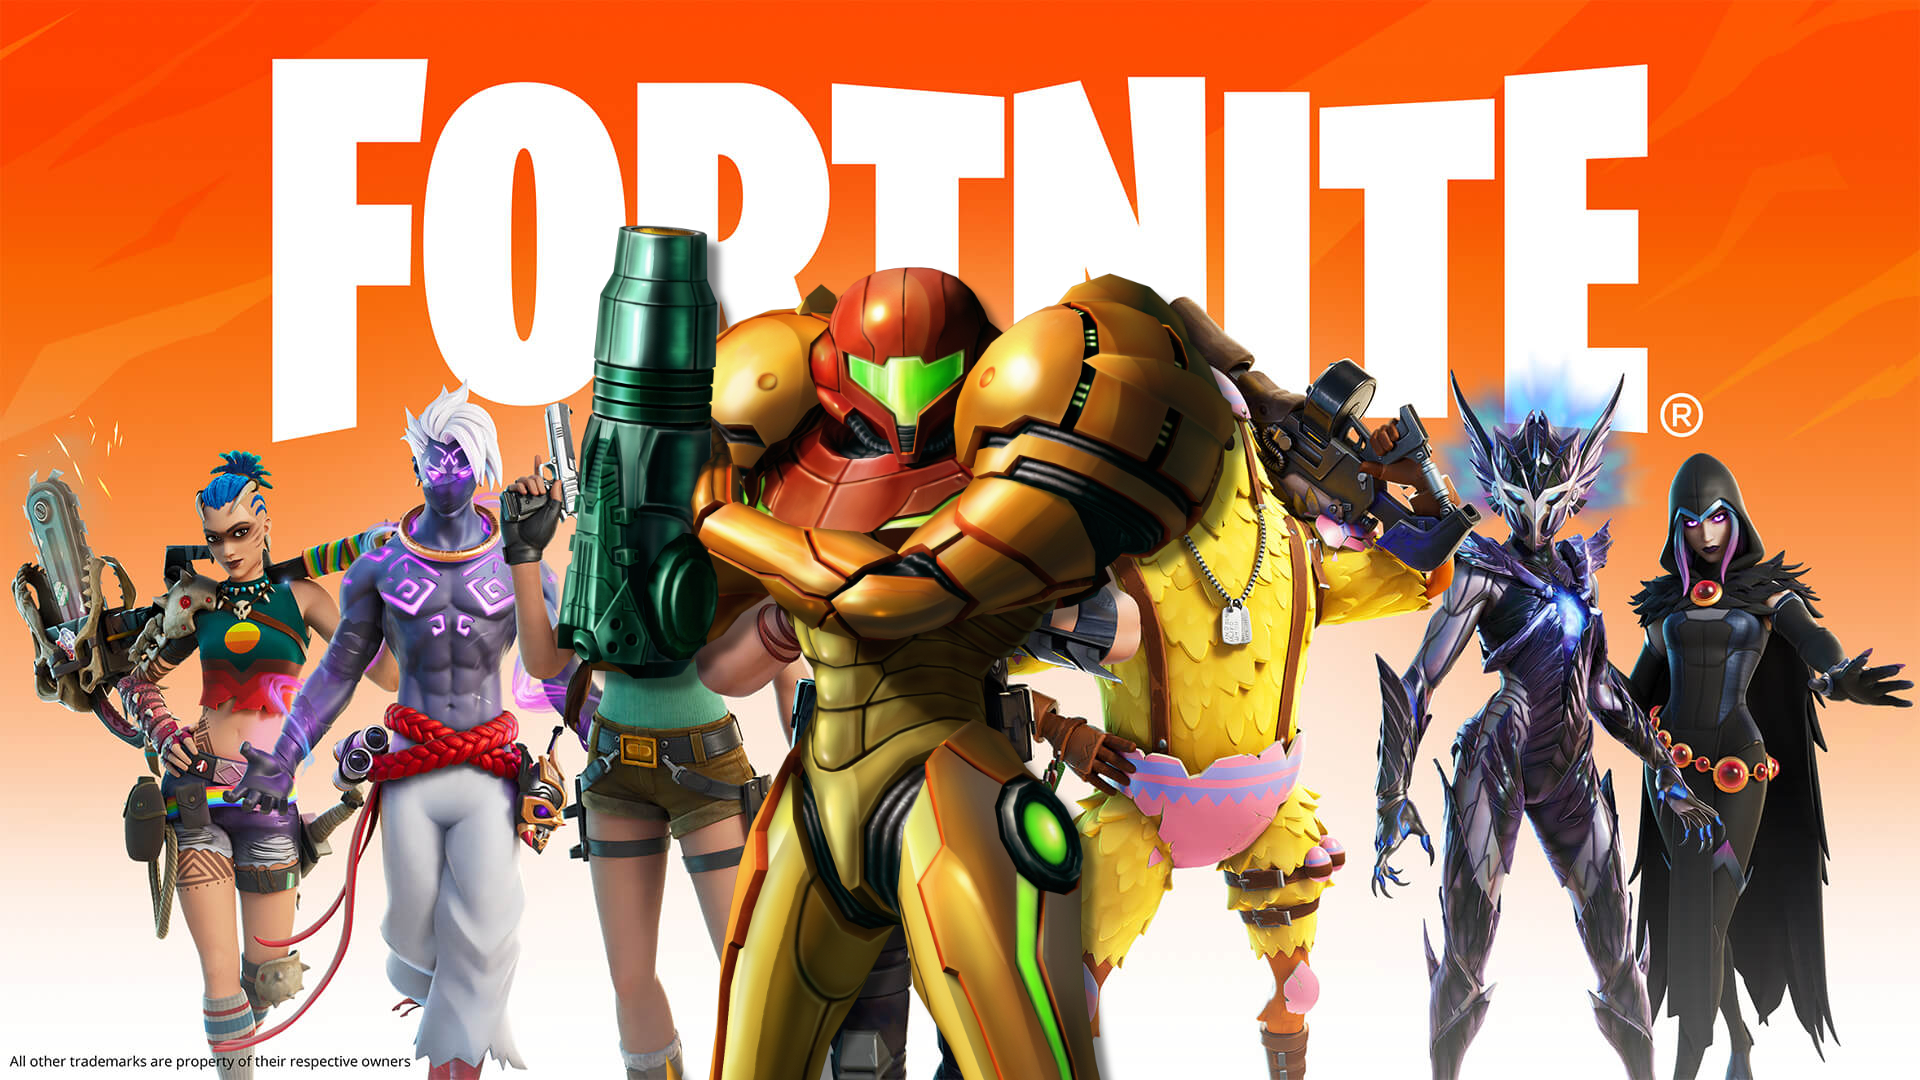 Fortnite The Nindo 2022: Sign up, challenges and free Fortnite X